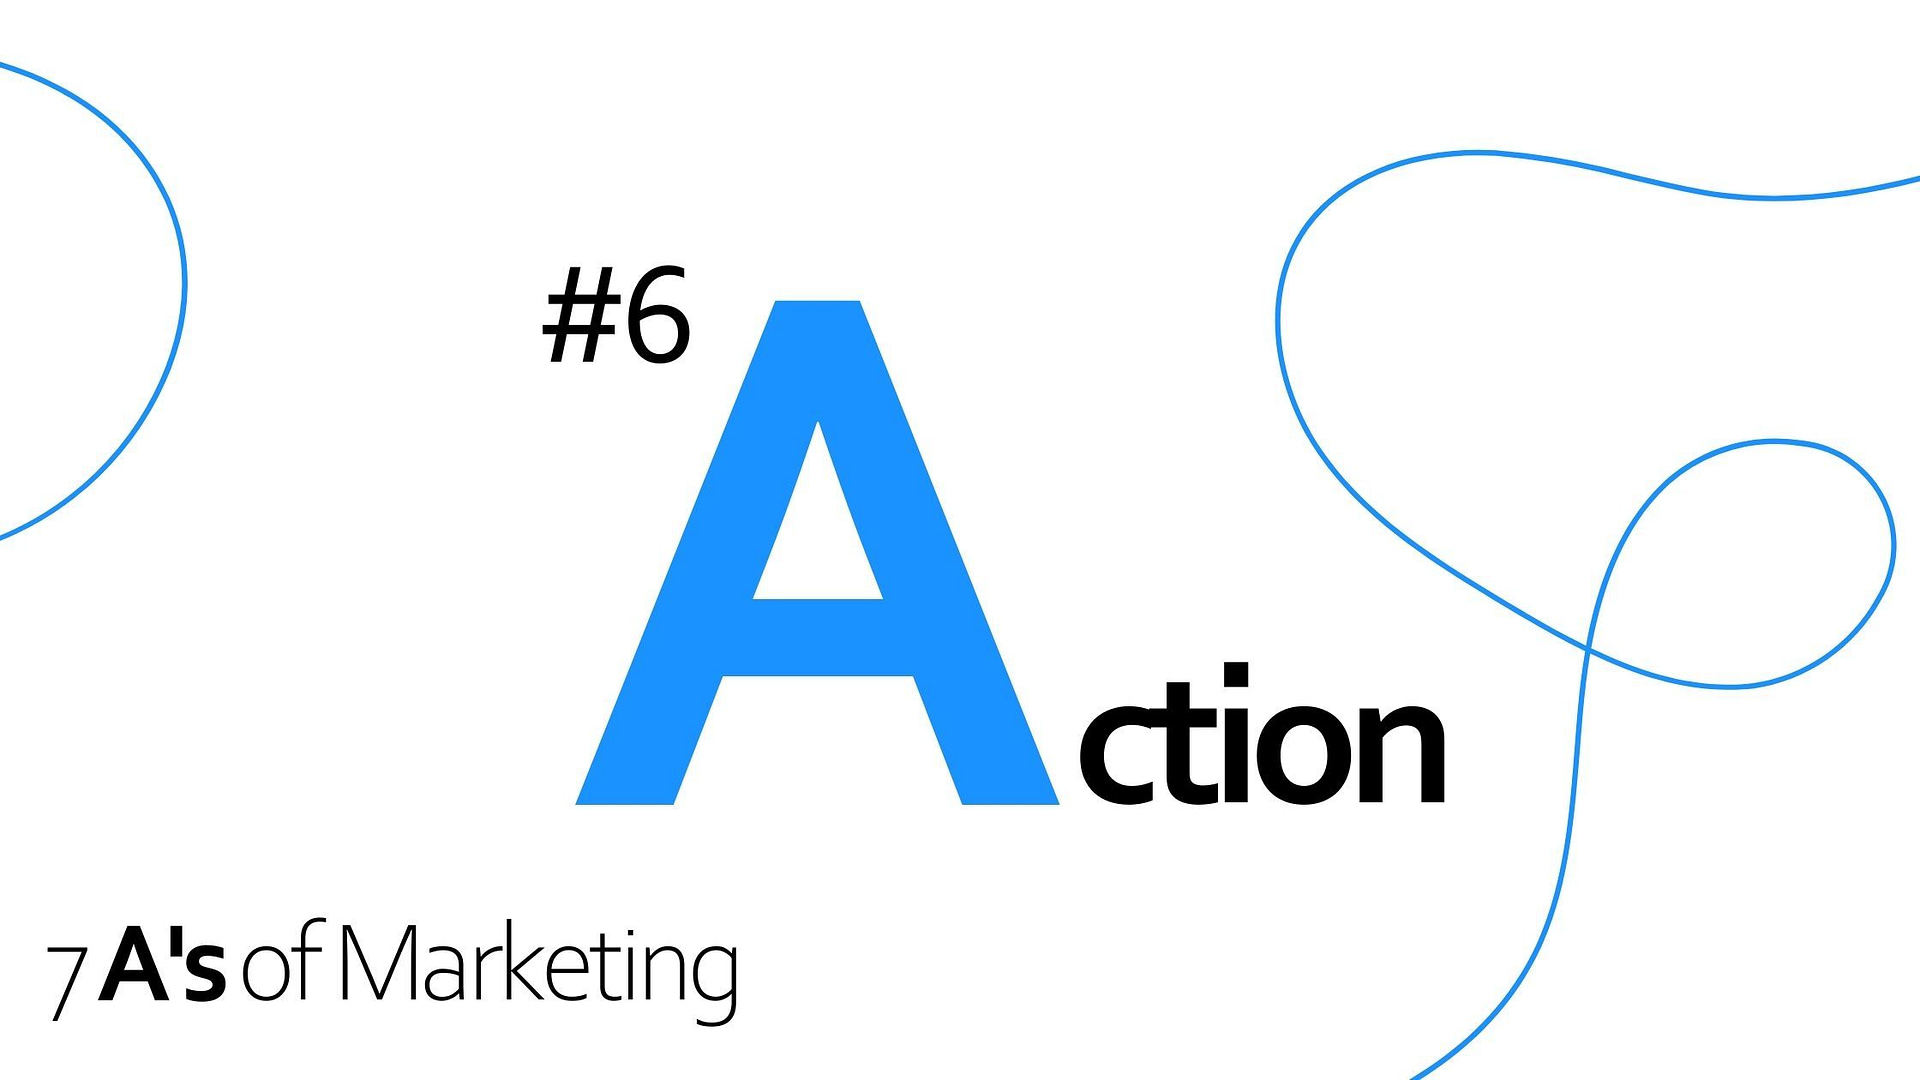 7 A's of Marketing - #6 Action